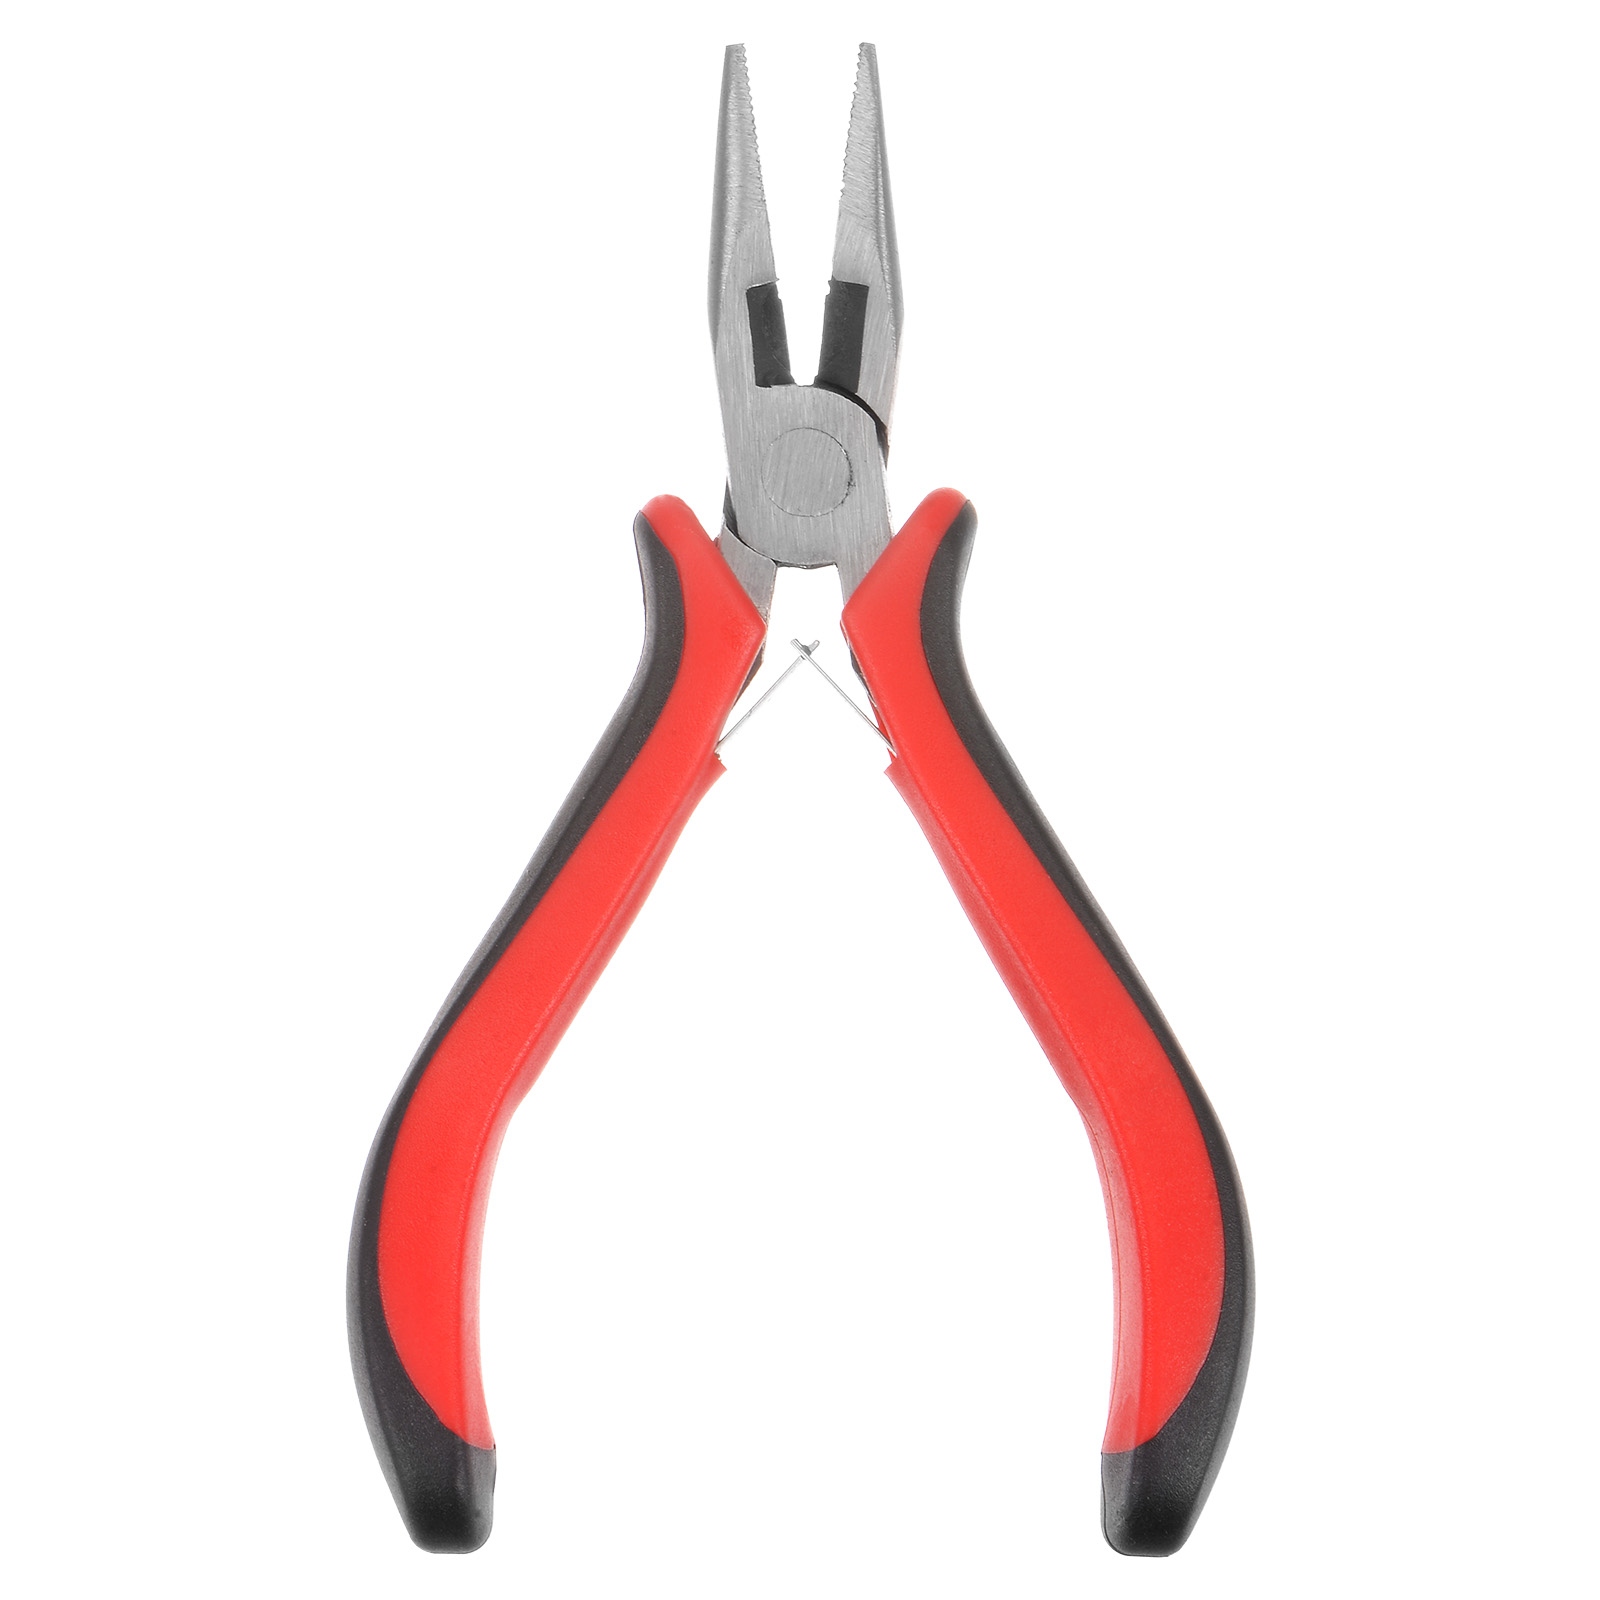 Mini Needle Nose Pliers 4.5 Toothed Precision Plier W Plastic Handle - Black Red